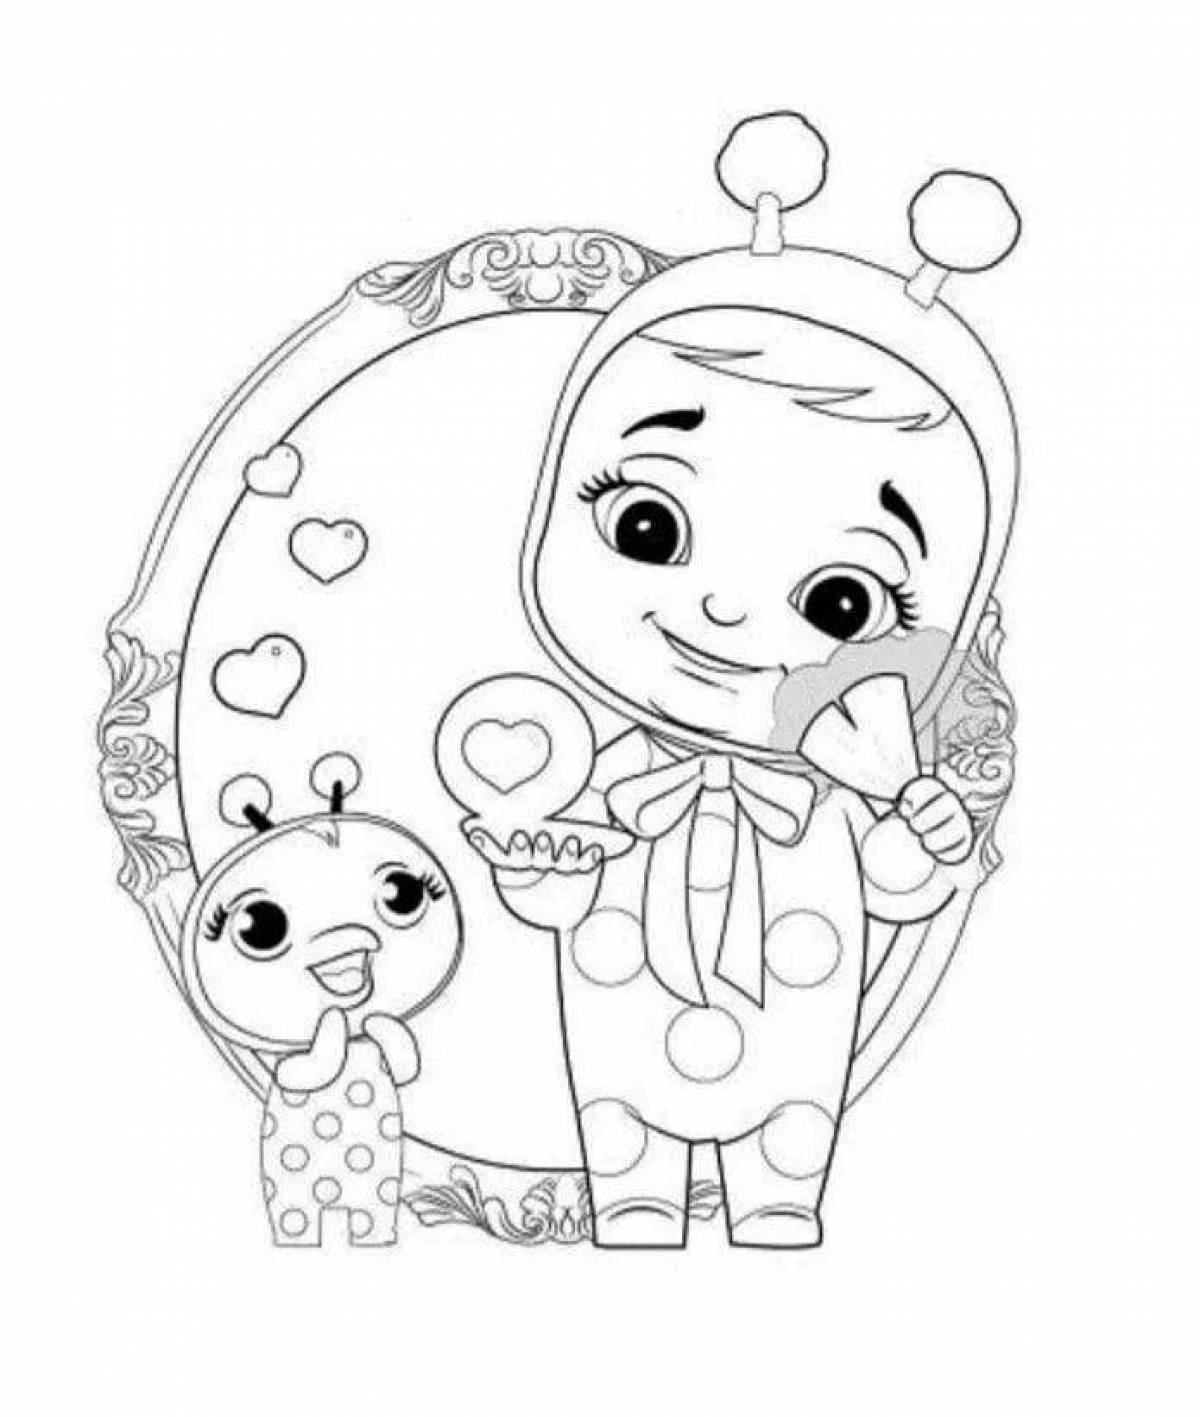 Smiling baby coloring book